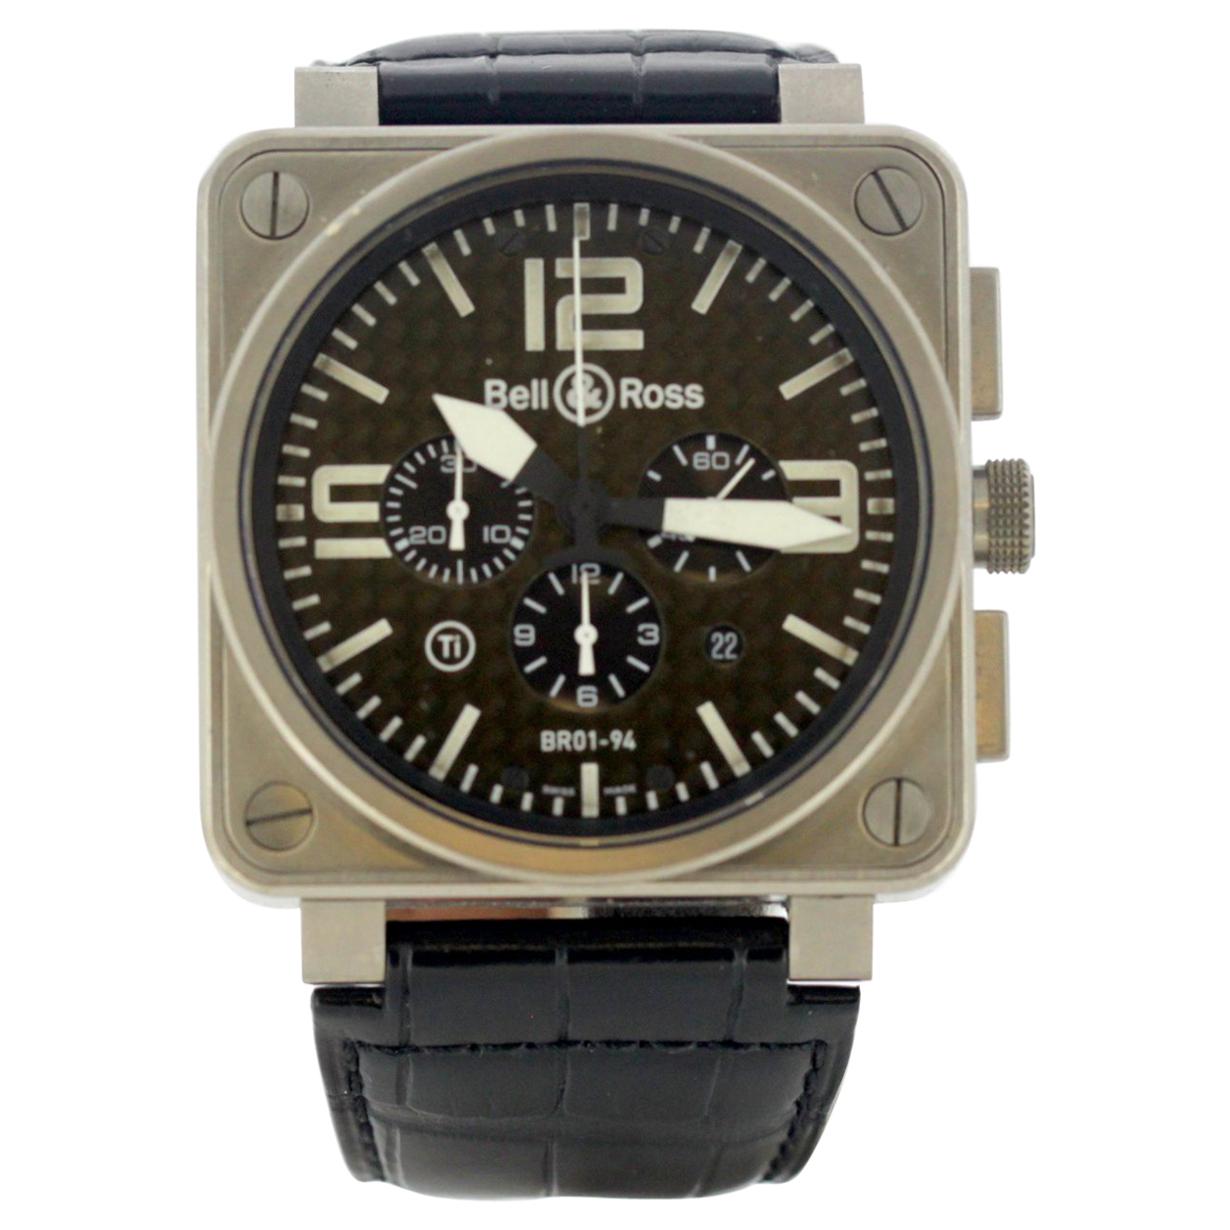 Bell & Ross BR 01-94 Chronographe or Chronograph Wristwatch